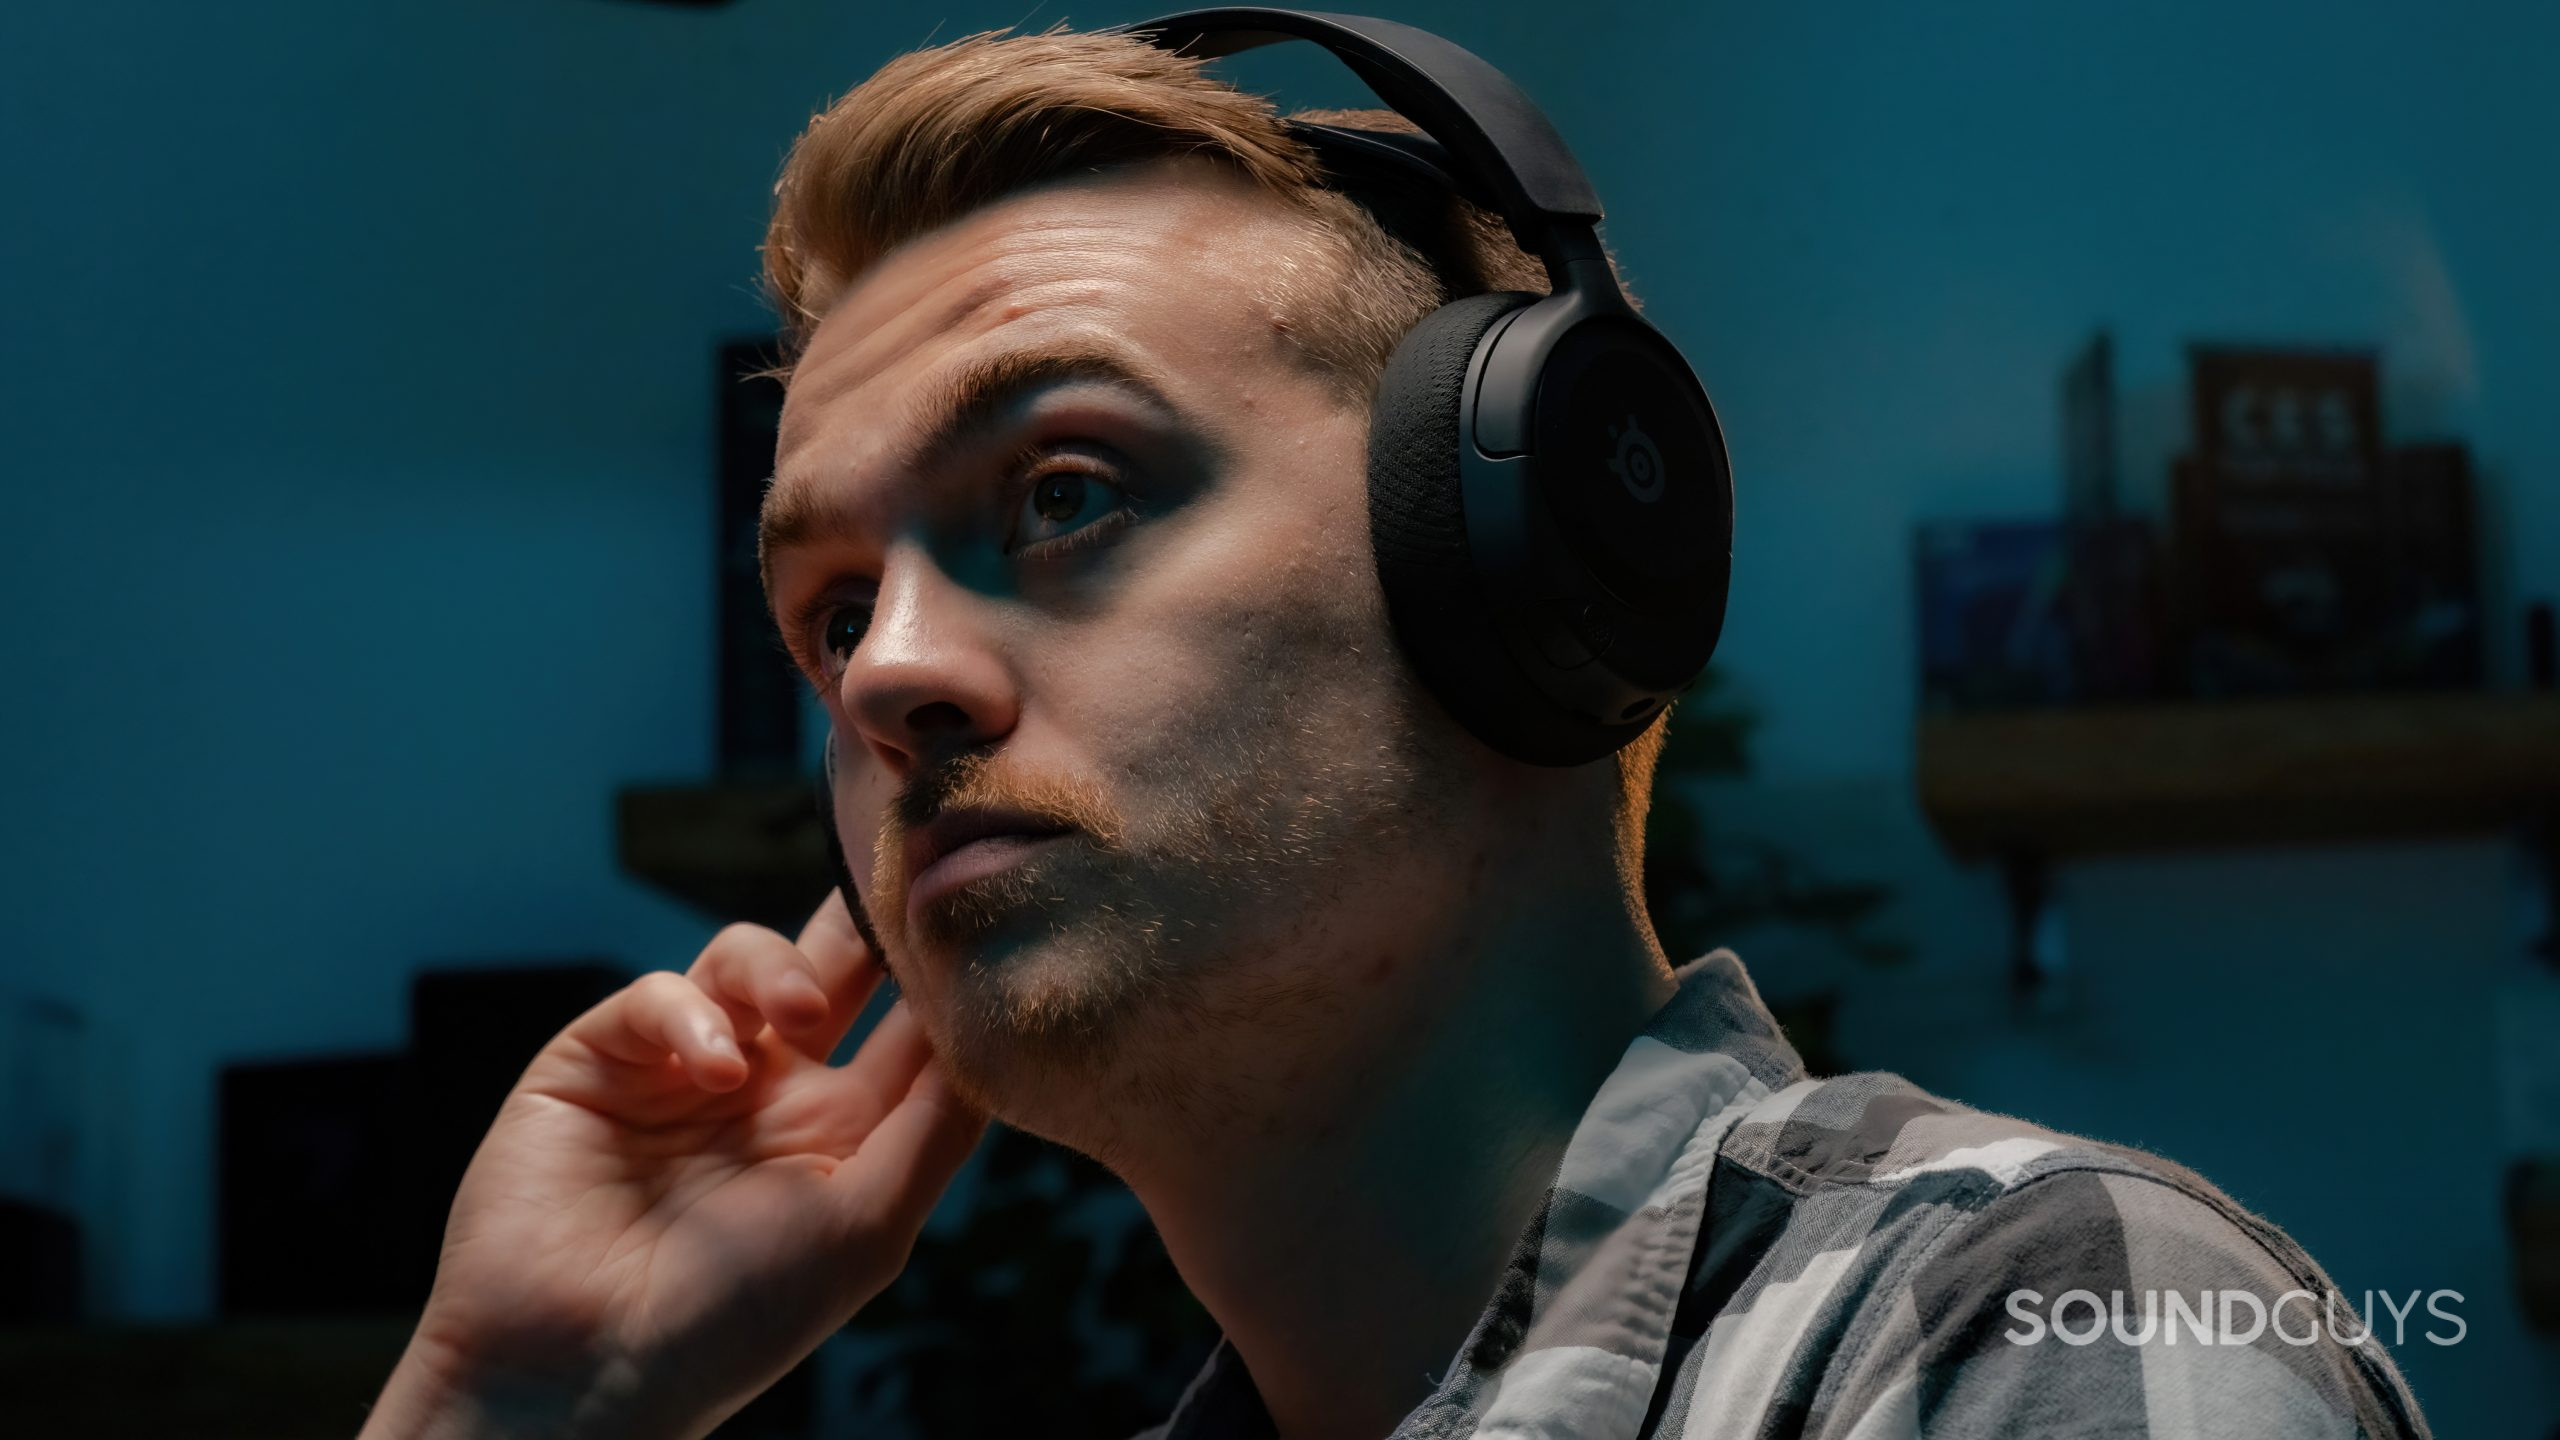 The SteelSeries Arctis Nova 1 being worn by a user with their hand to one of the earcups.